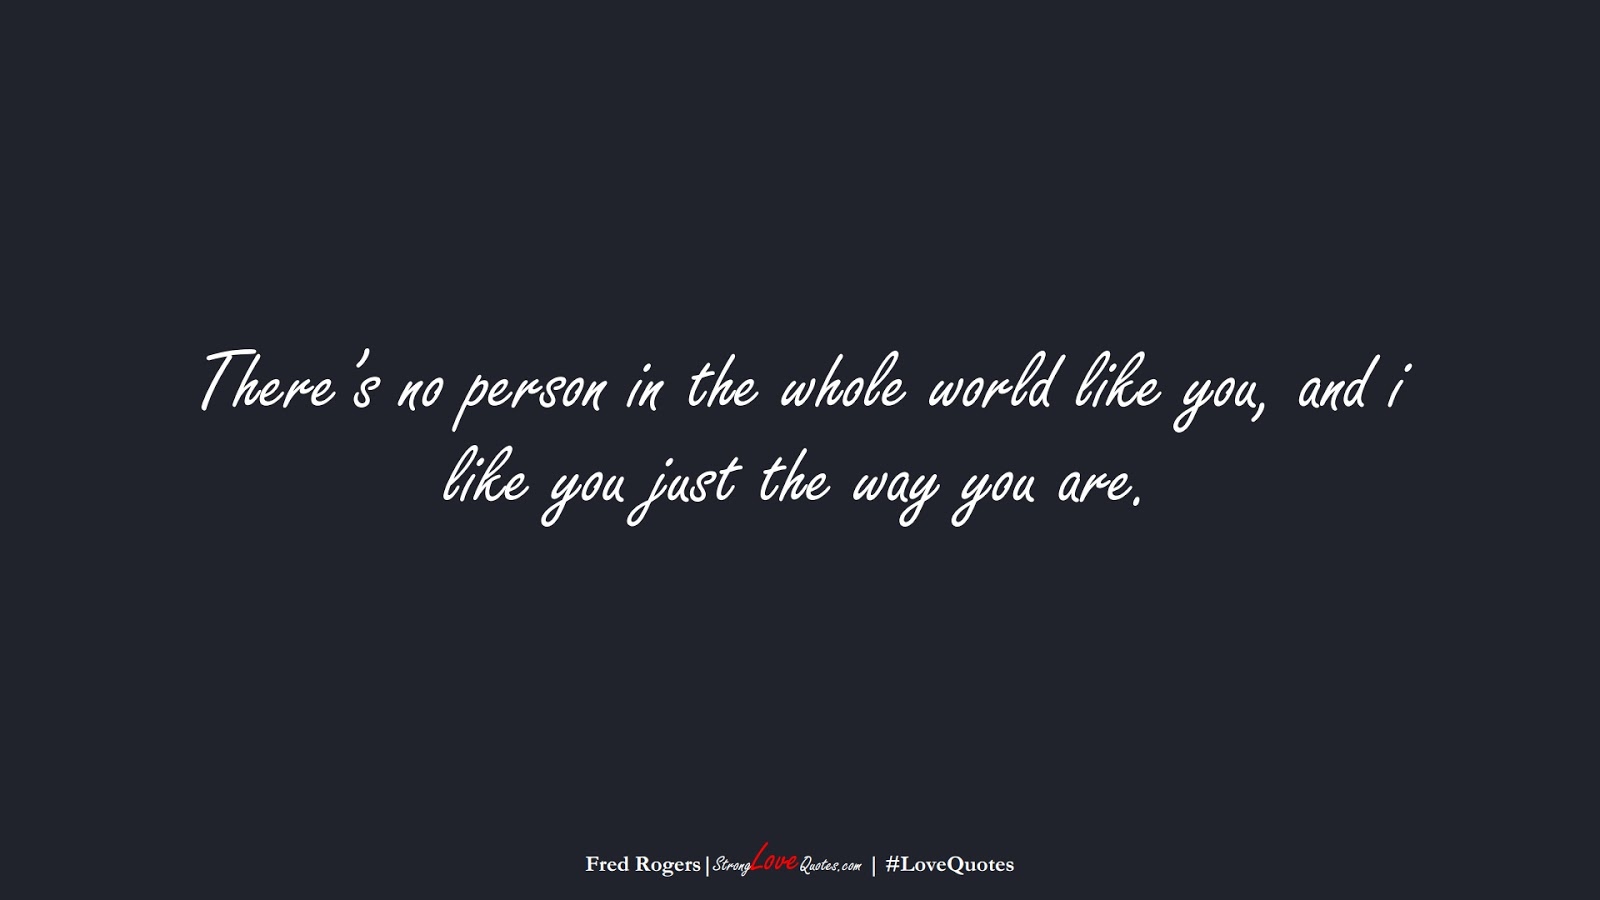 There’s no person in the whole world like you, and i like you just the way you are. (Fred Rogers);  #LoveQuotes